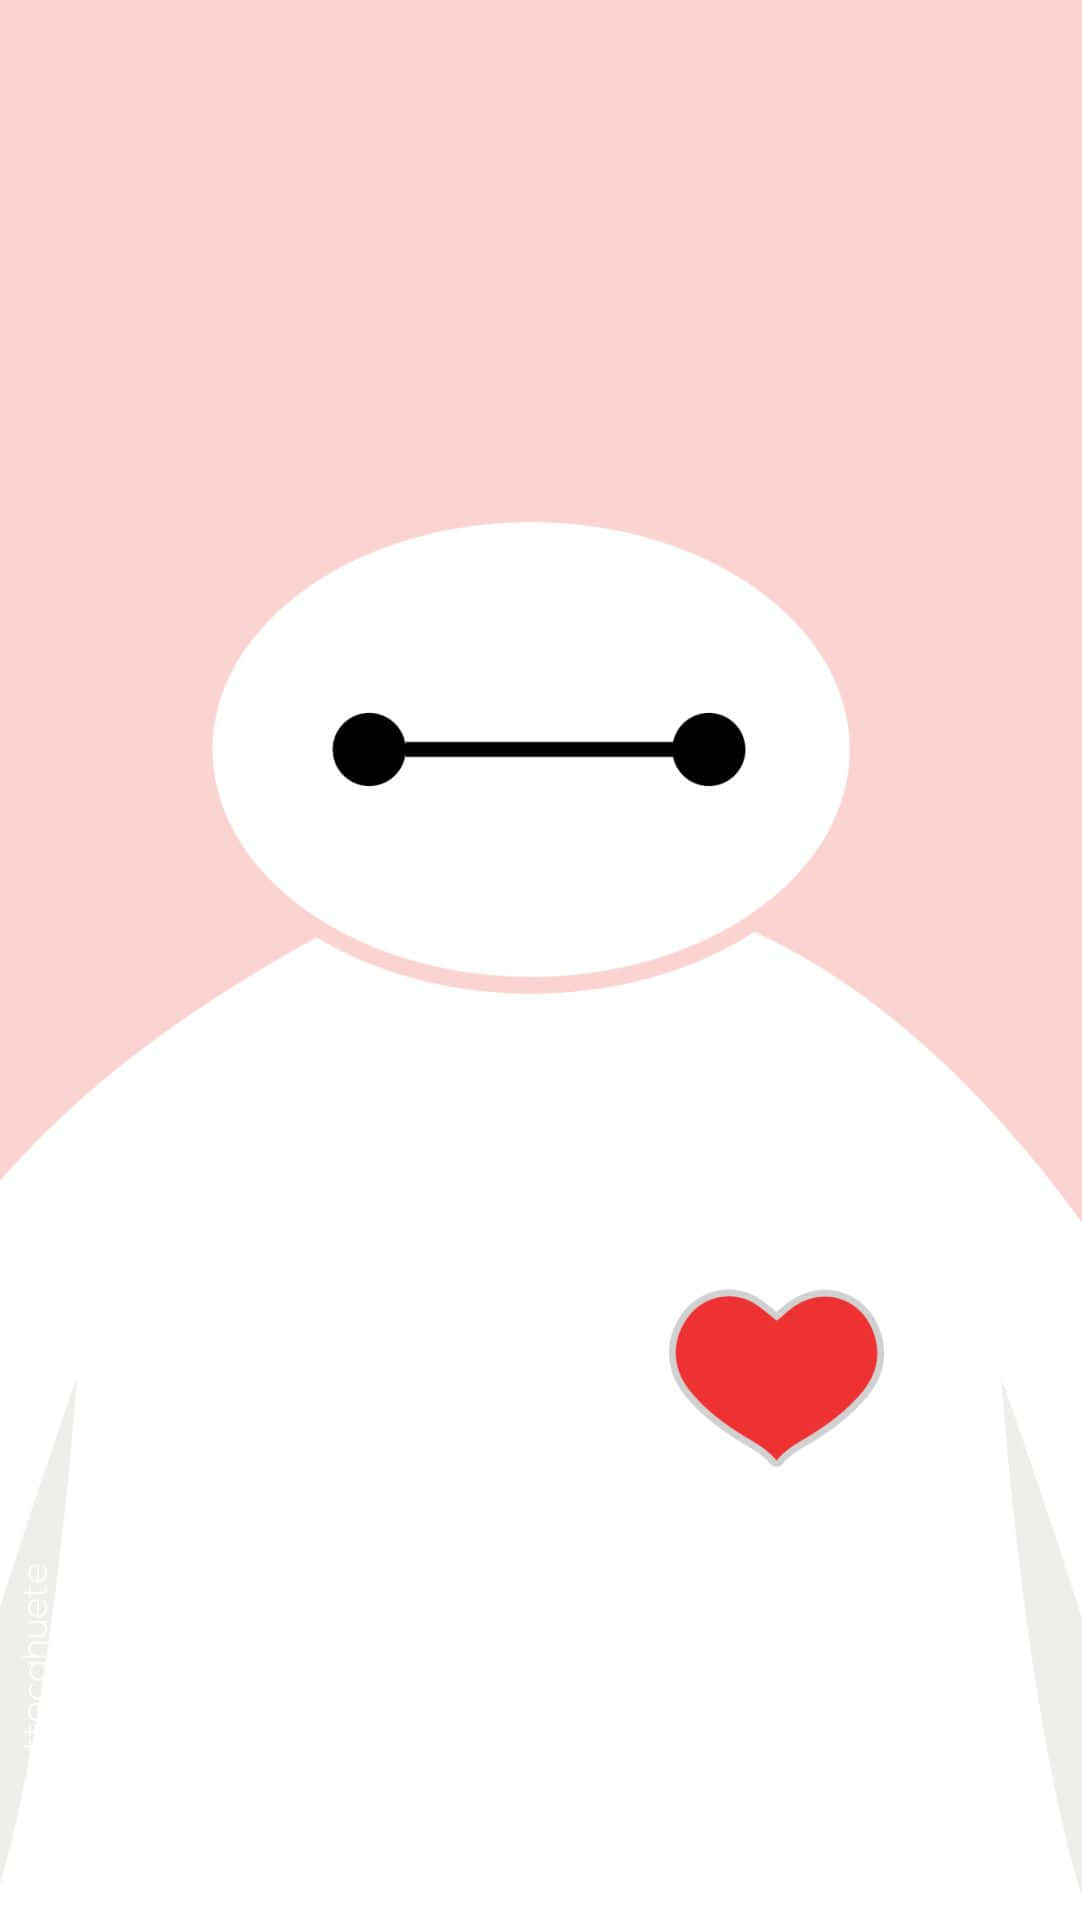 Cute Baymax With Heart On Pink Background